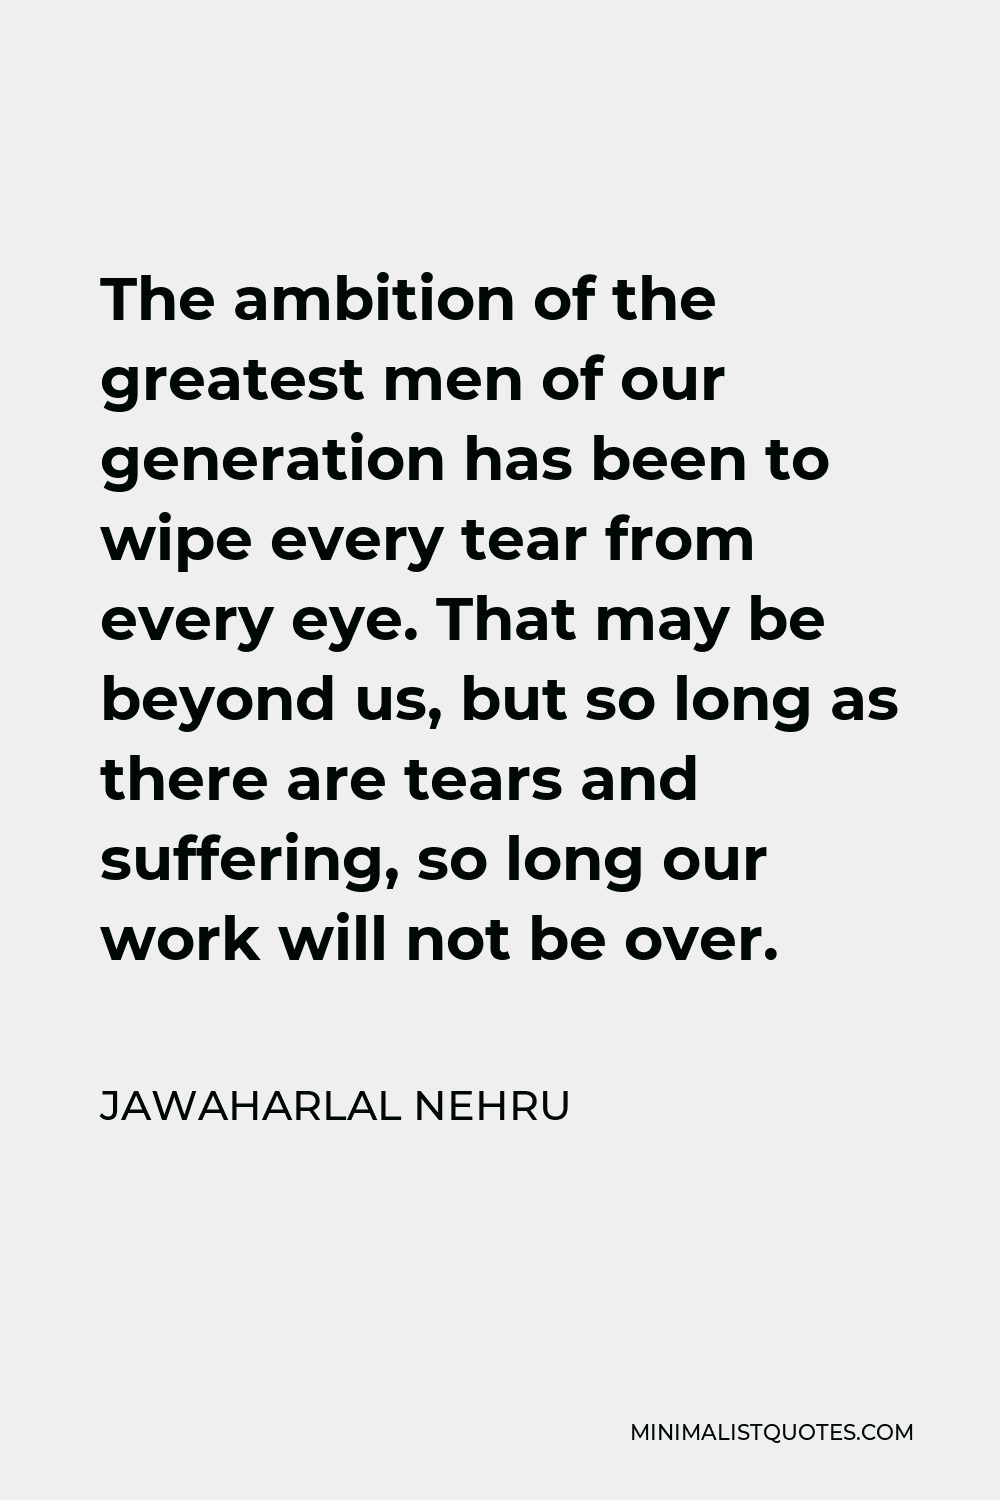 Jawaharlal Nehru Quote - The ambition of the greatest men of our generation has been to wipe every tear from every eye. That may be beyond us, but so long as there are tears and suffering, so long our work will not be over.